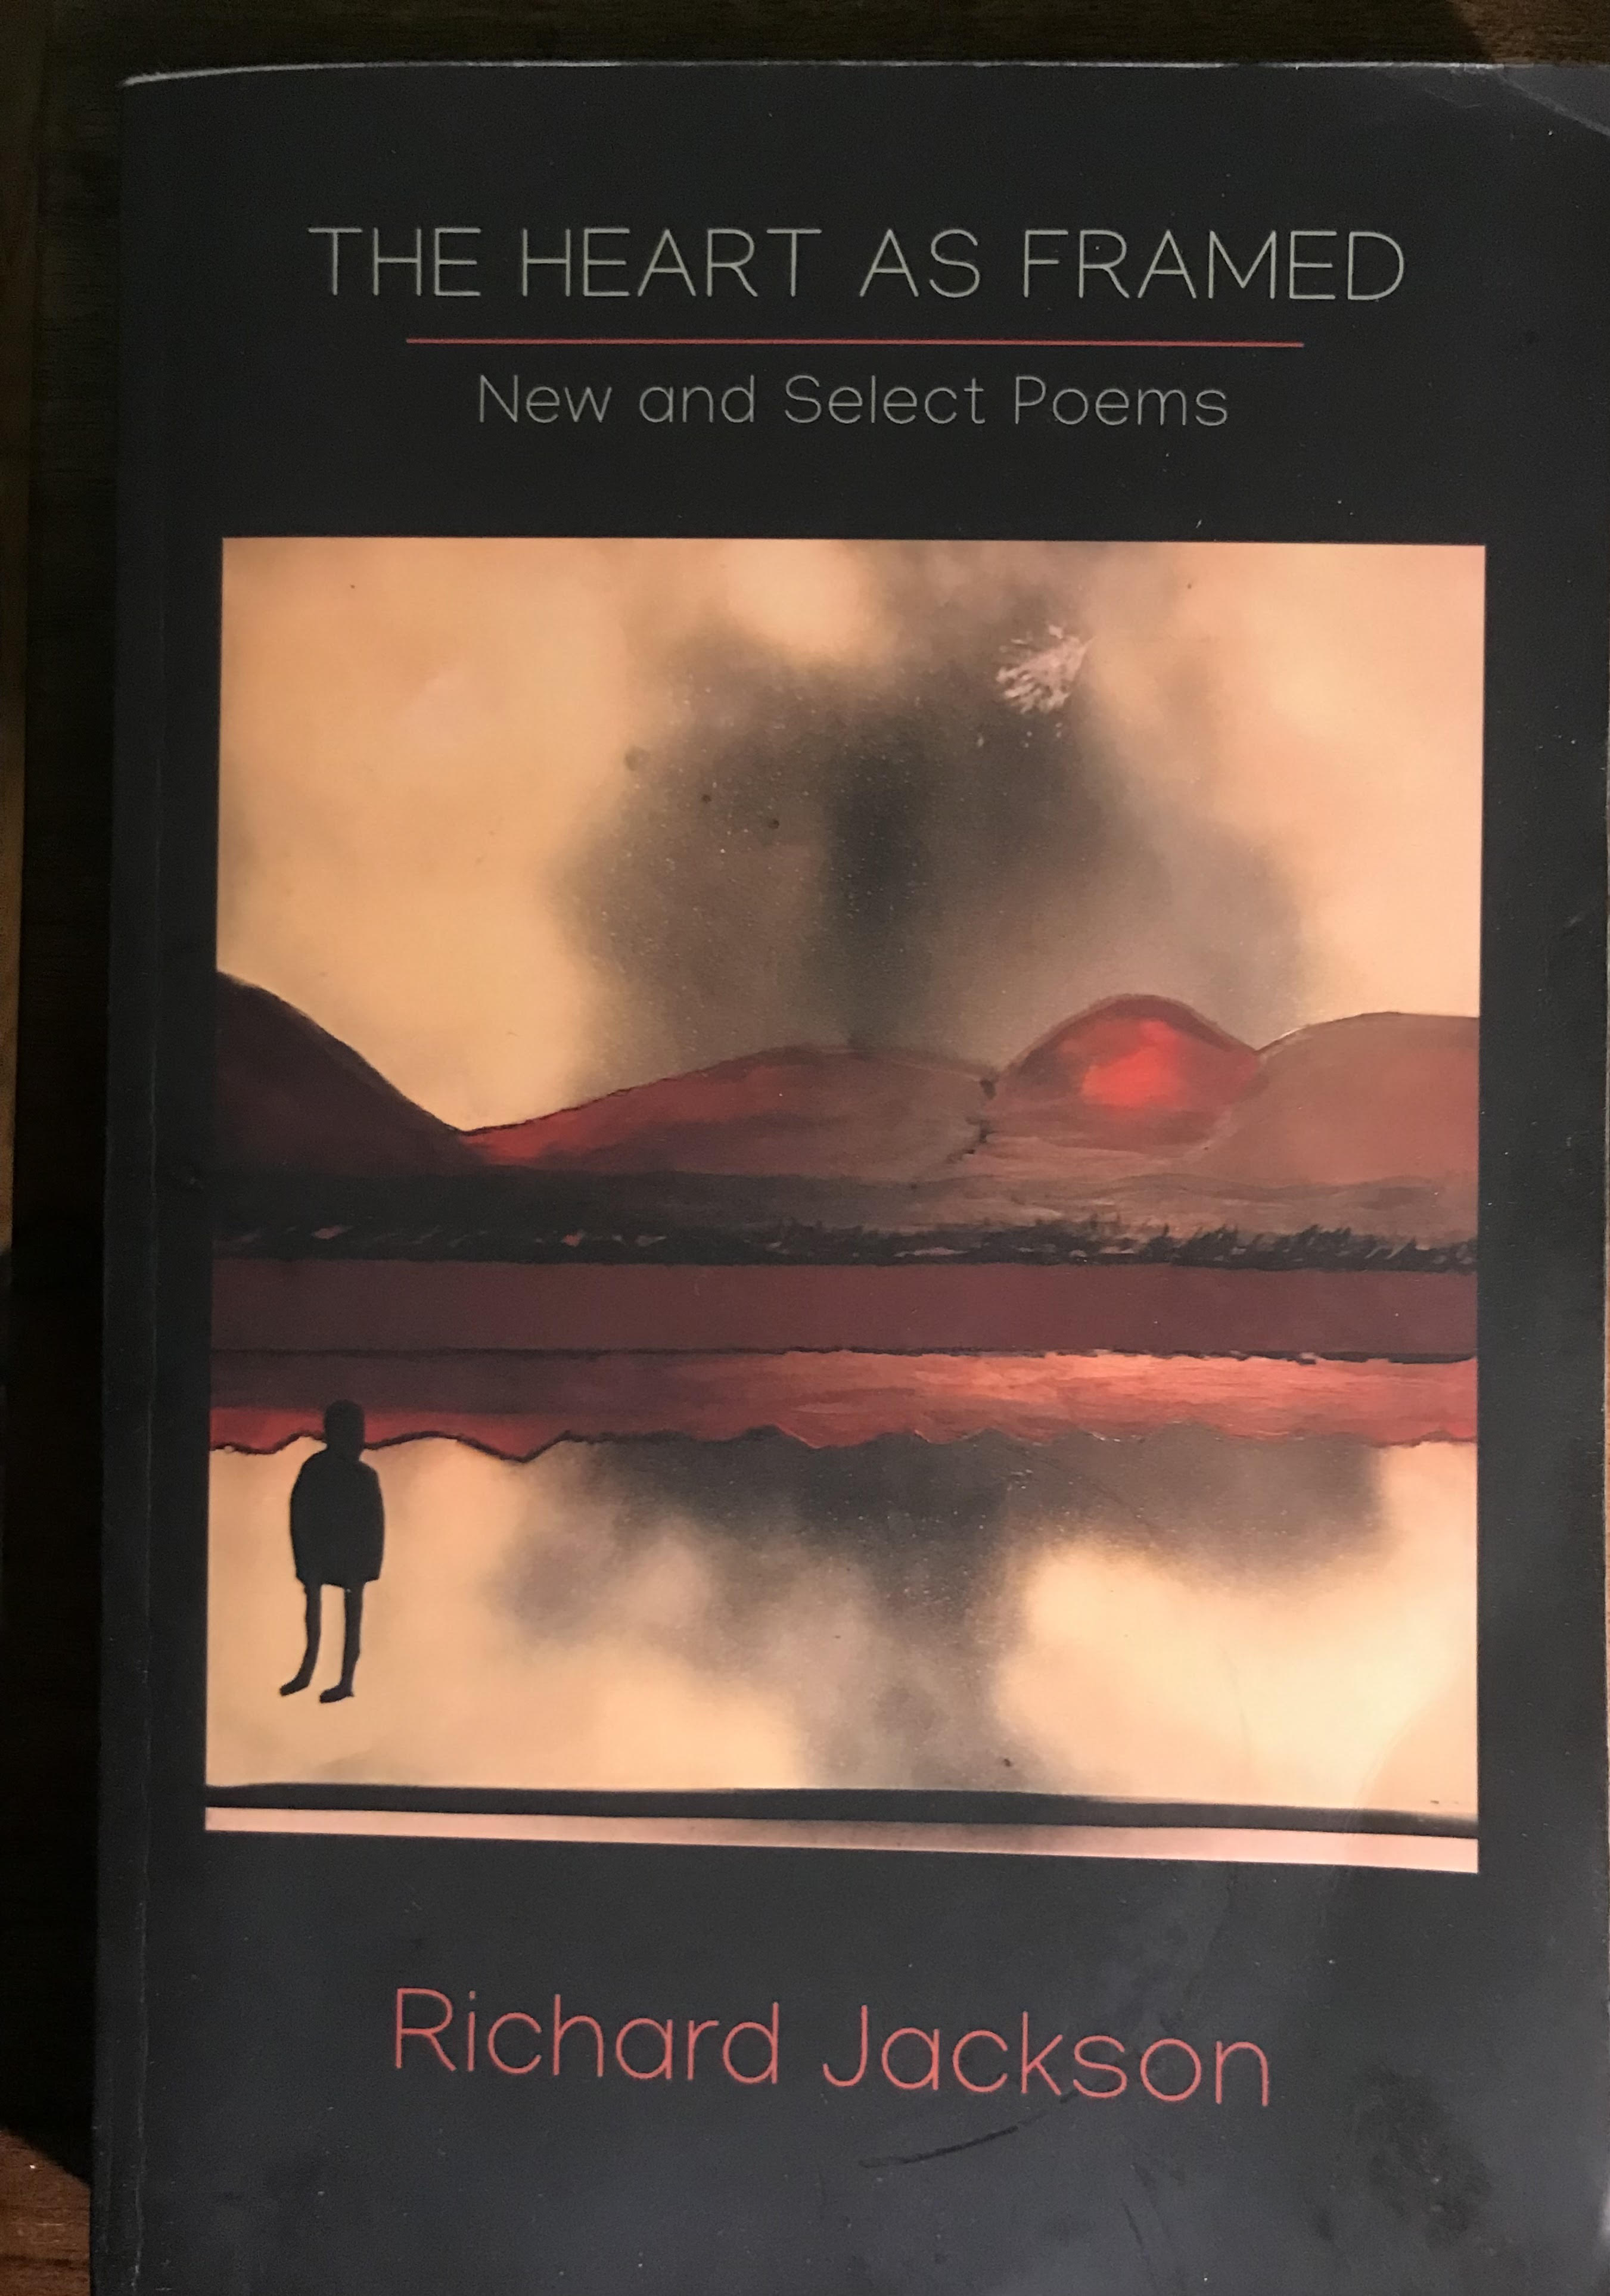 The Heart As Framed: New and Select Poems